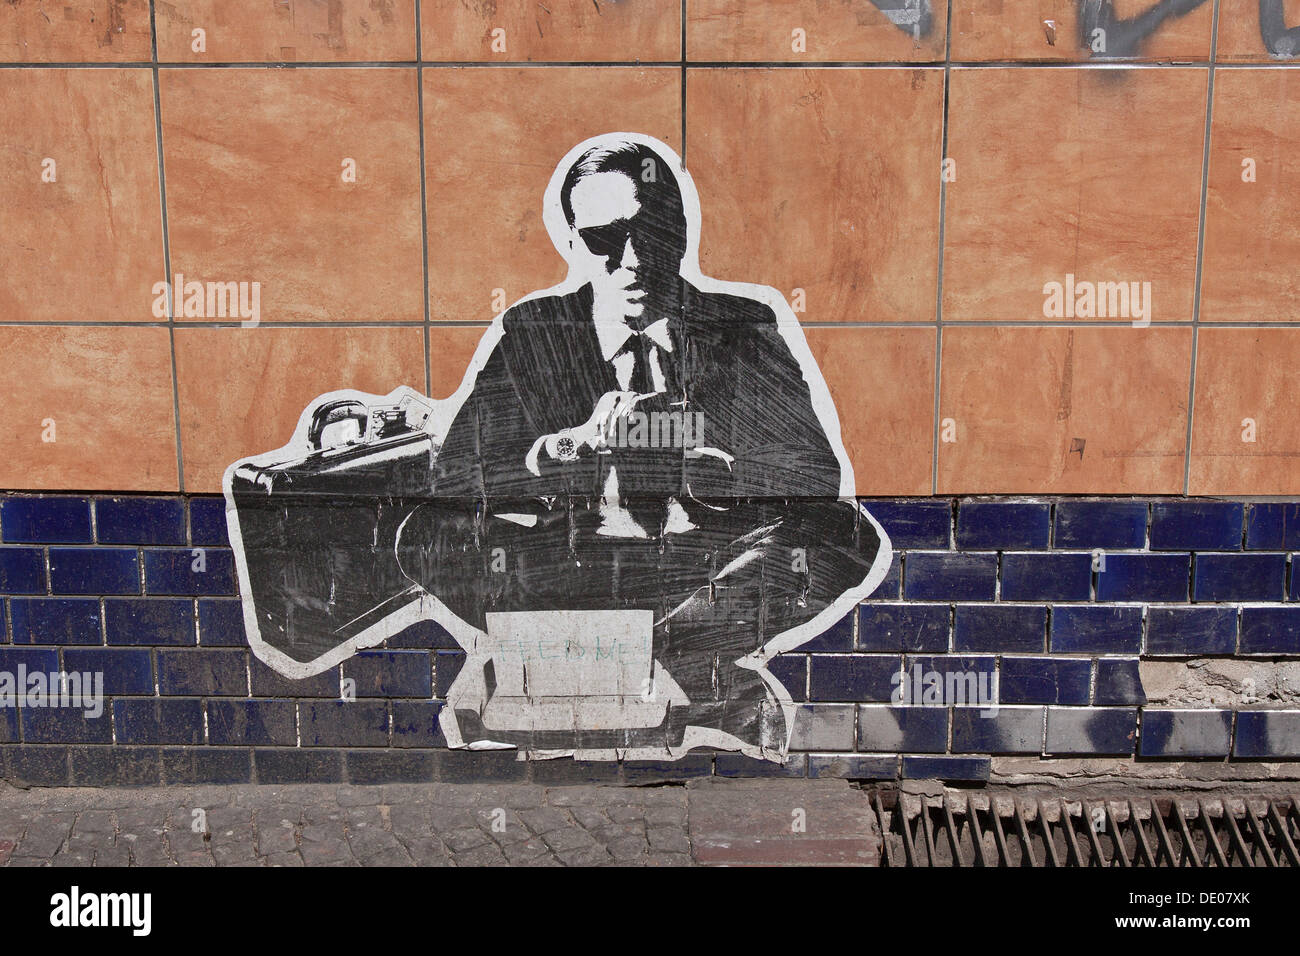 Man wearing a suit, banker or businessman with a briefcase, poster glued on a wall, Berlin Stock Photo